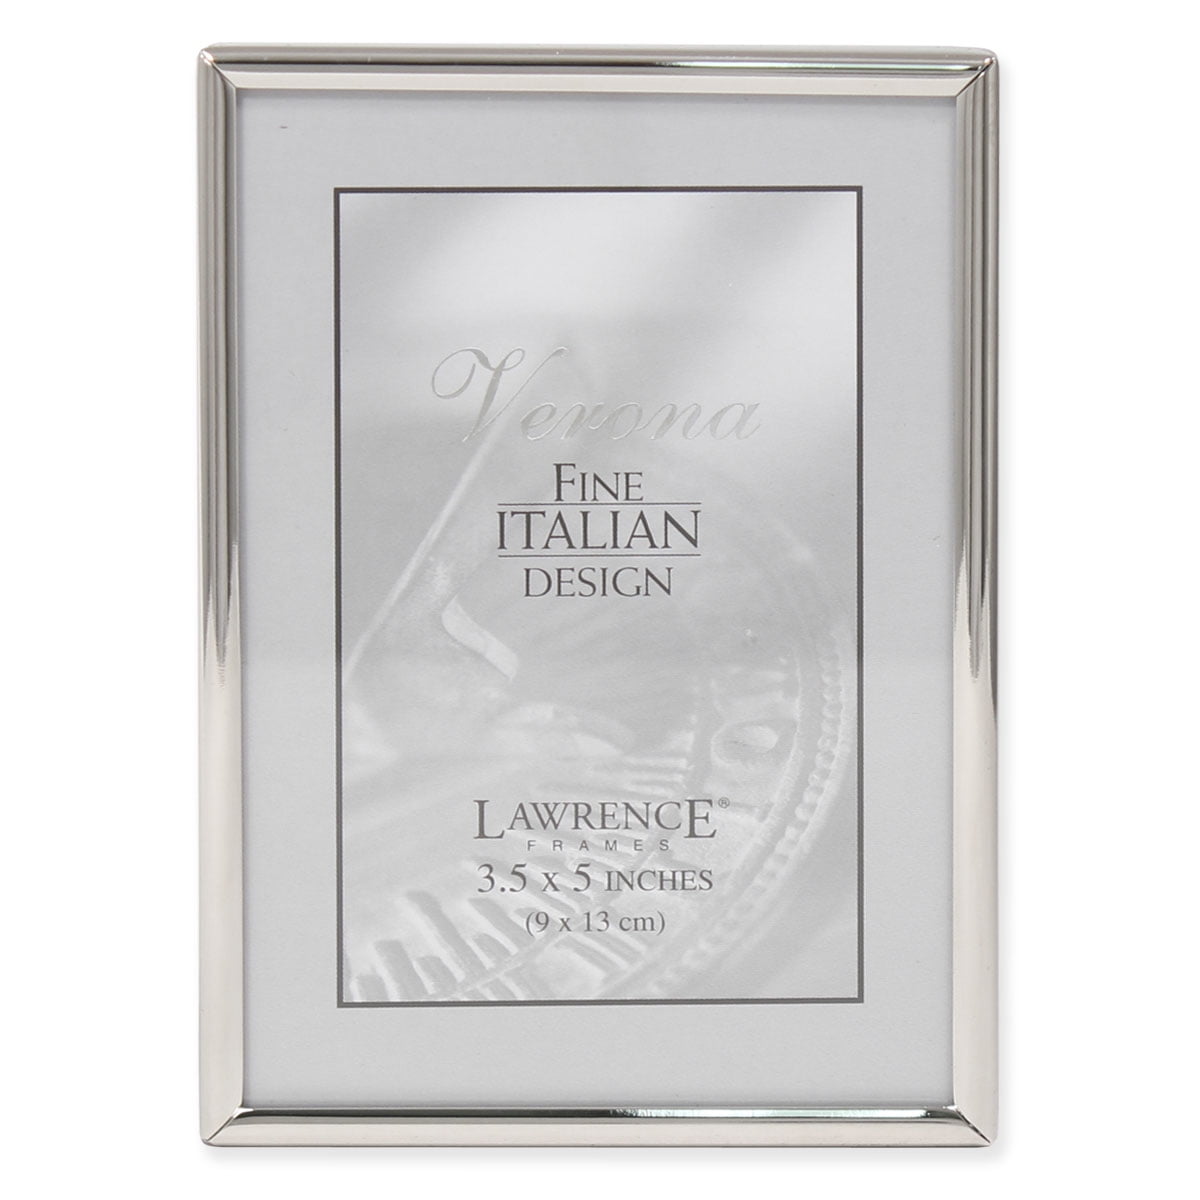 Small Photo Frames Brushed Metal frame with Glass Front 2-Pk 3.5 x 5 Silver Photo Frames Matte Metal Traditional Fancy Design Bulk Set Decorative Picture Frames 3.5 by 5 Small Picture Frames